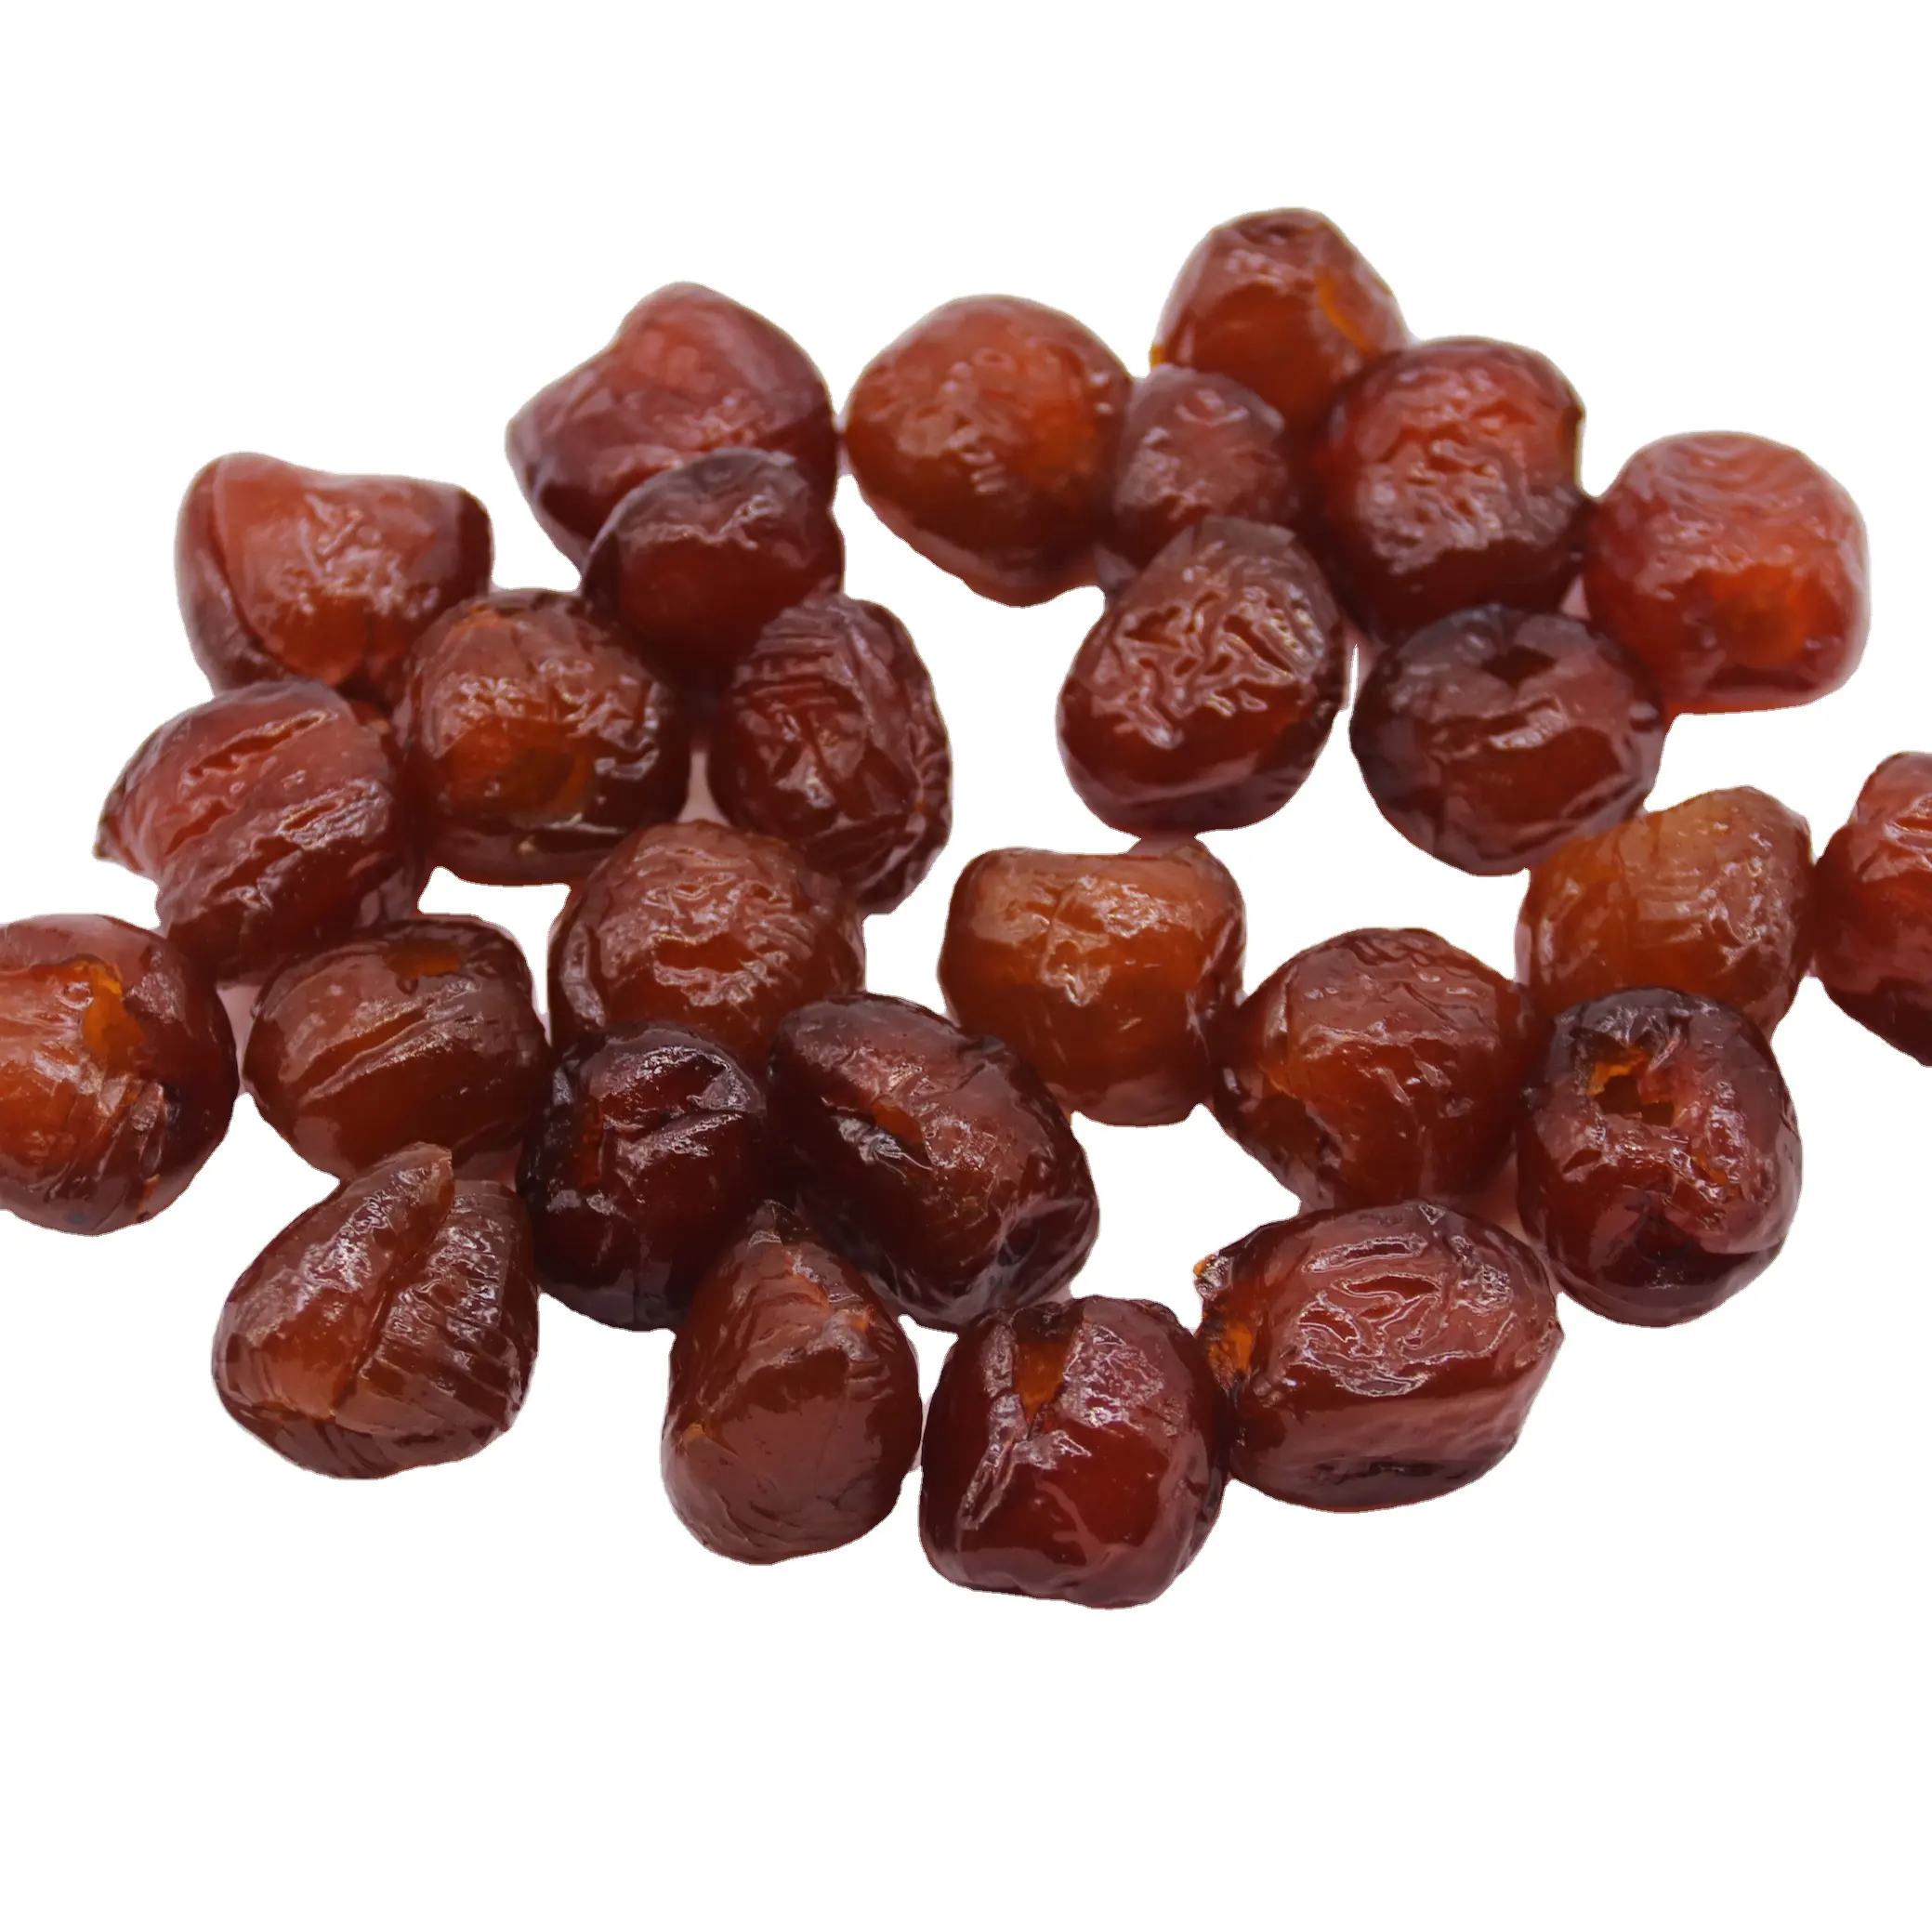 China wholesale price sweet taste red color dried fruits dried date jujube (preserved date)